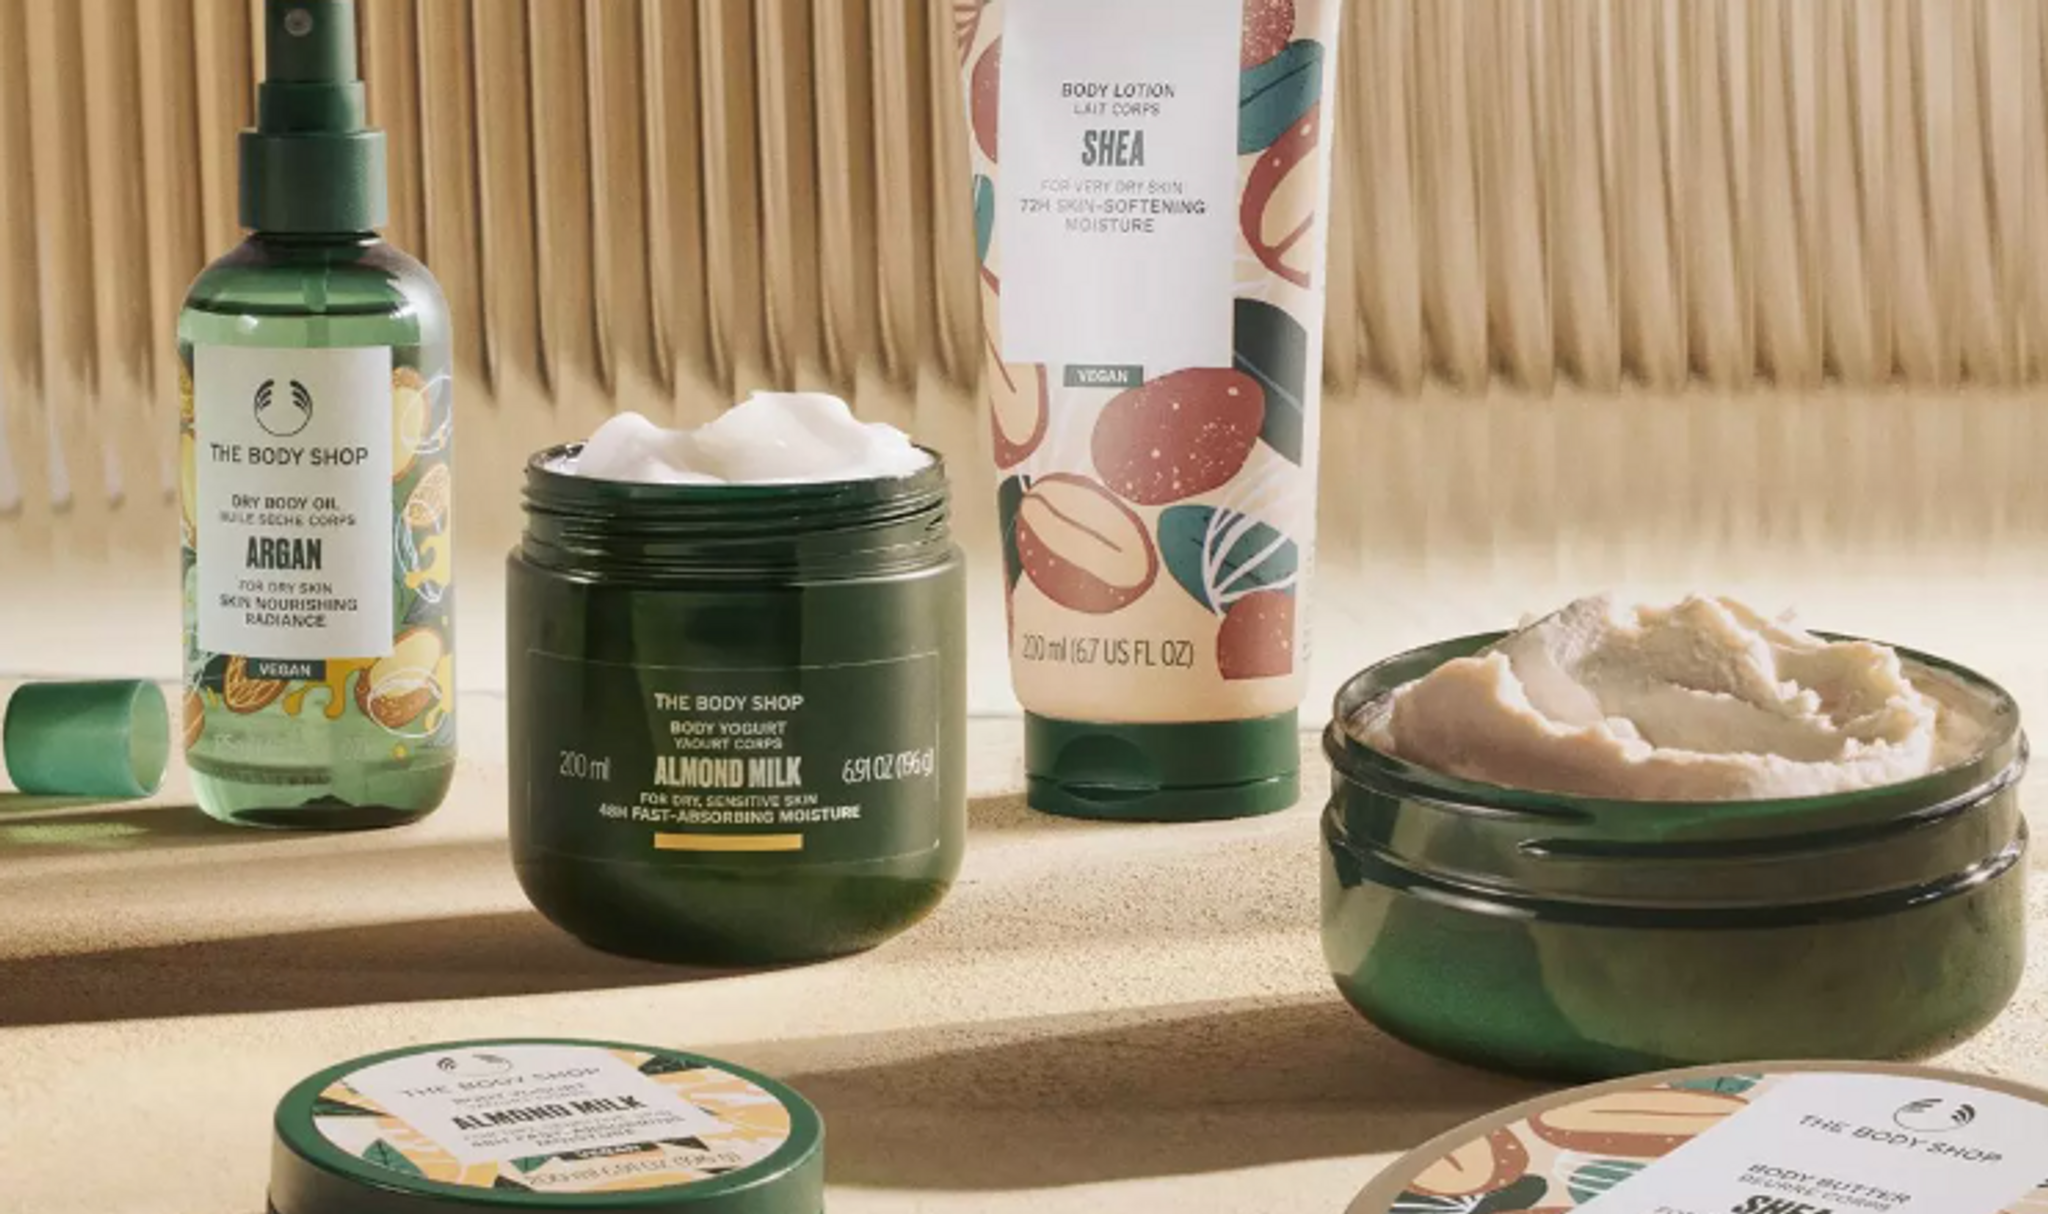 The Body Shop goes fully vegan on products